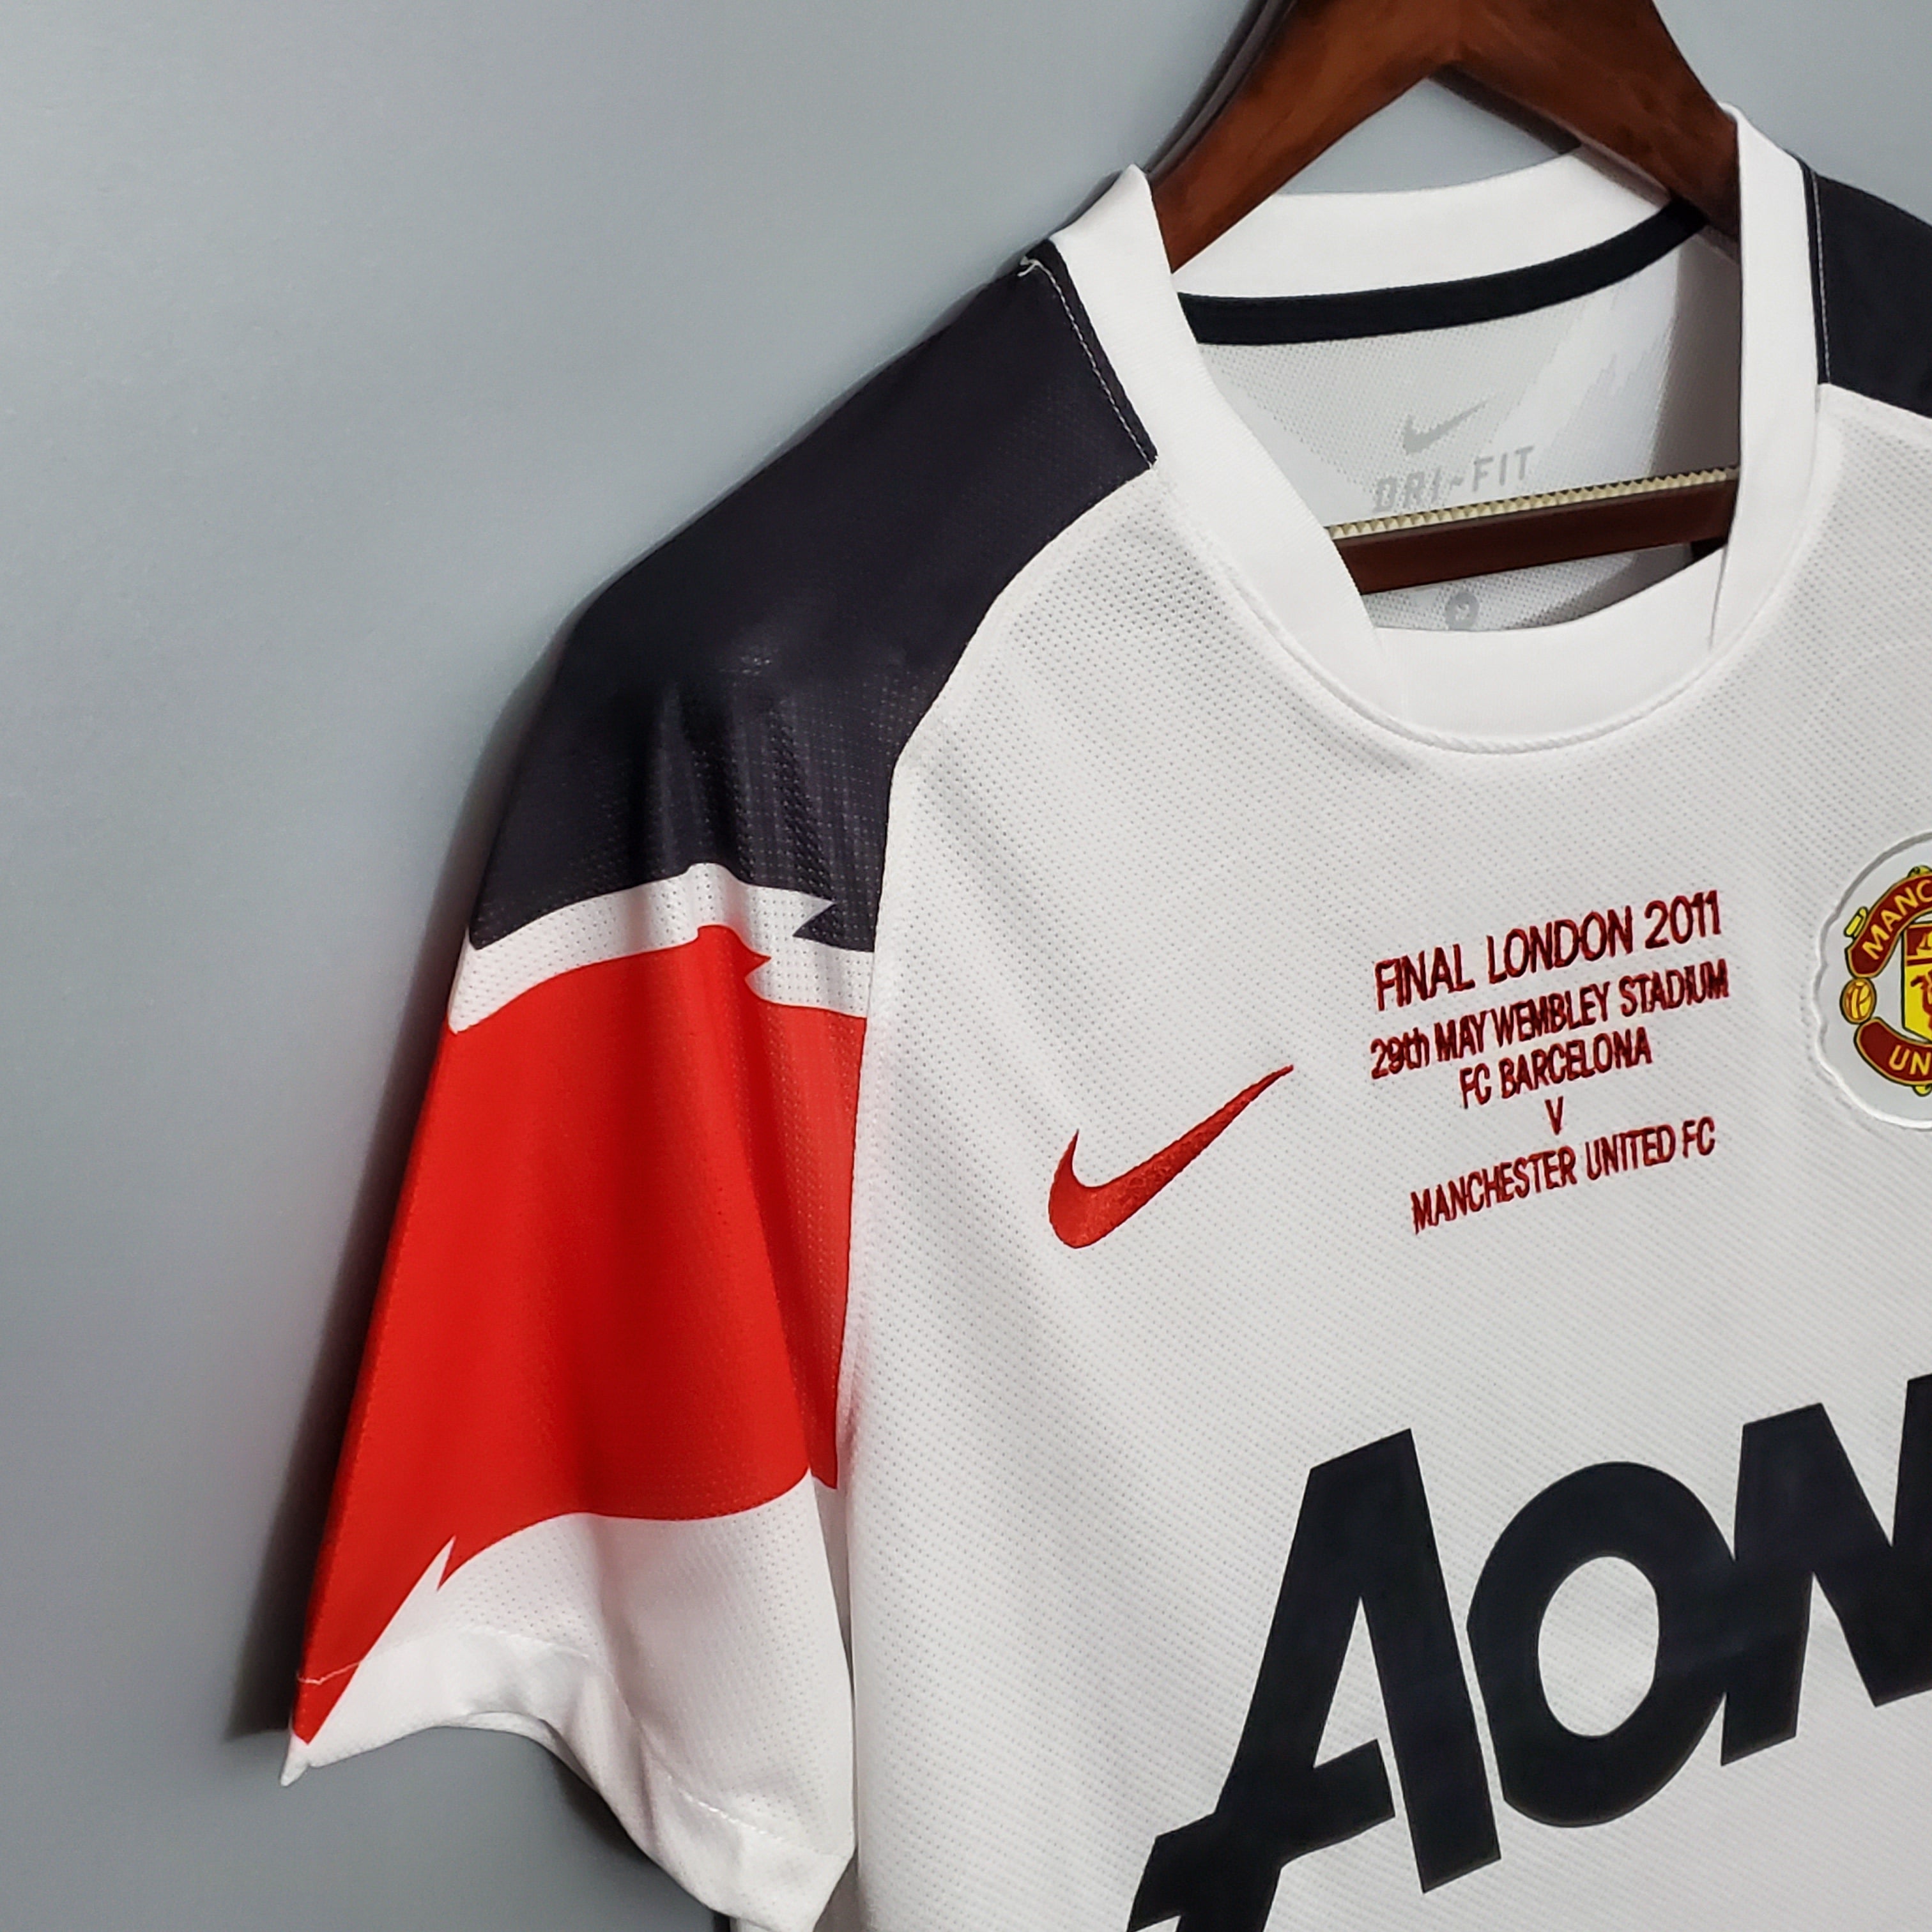 Manchester United 2010-11 Champions League Final Jersey